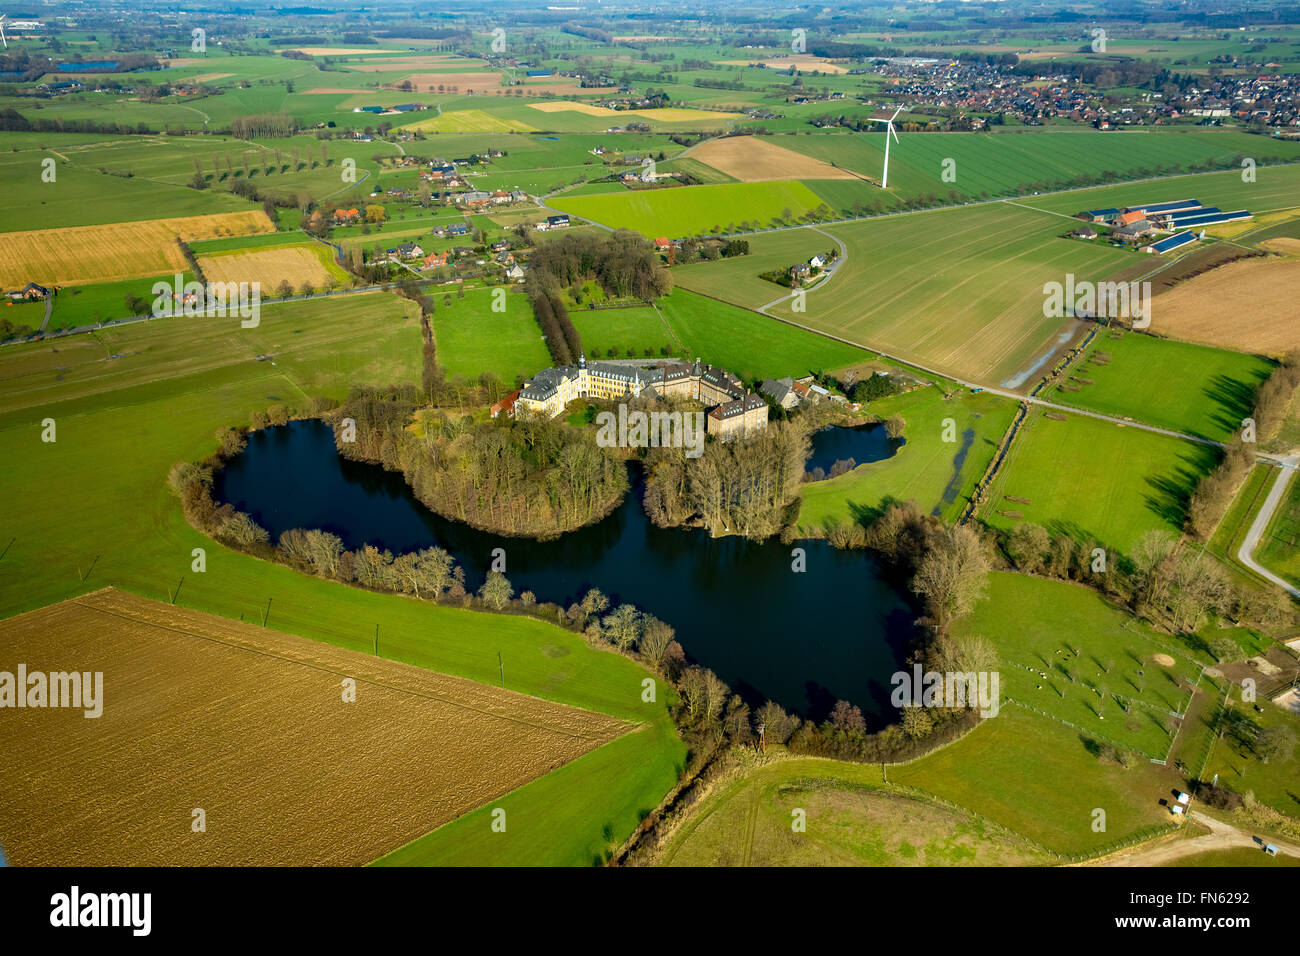 Aerial view, wild geese in Natuschutzgebiet at home Aspel, nature reserve, Aspeler sea, lakes with türkisfarbenenm water Rees Stock Photo